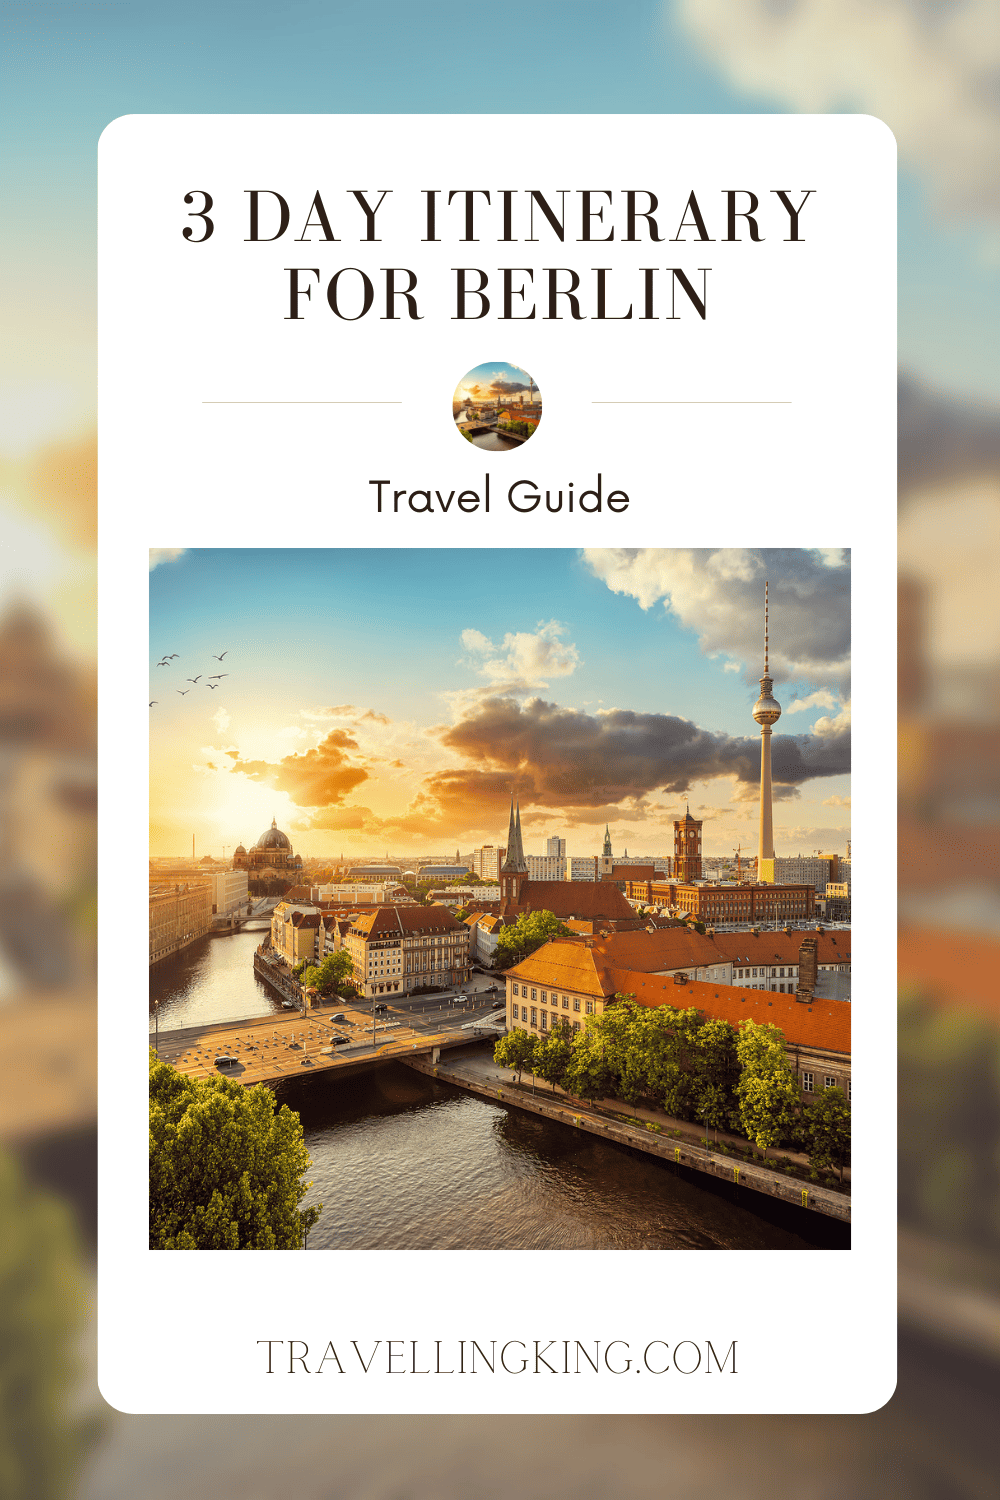 3 Day Itinerary for Berlin